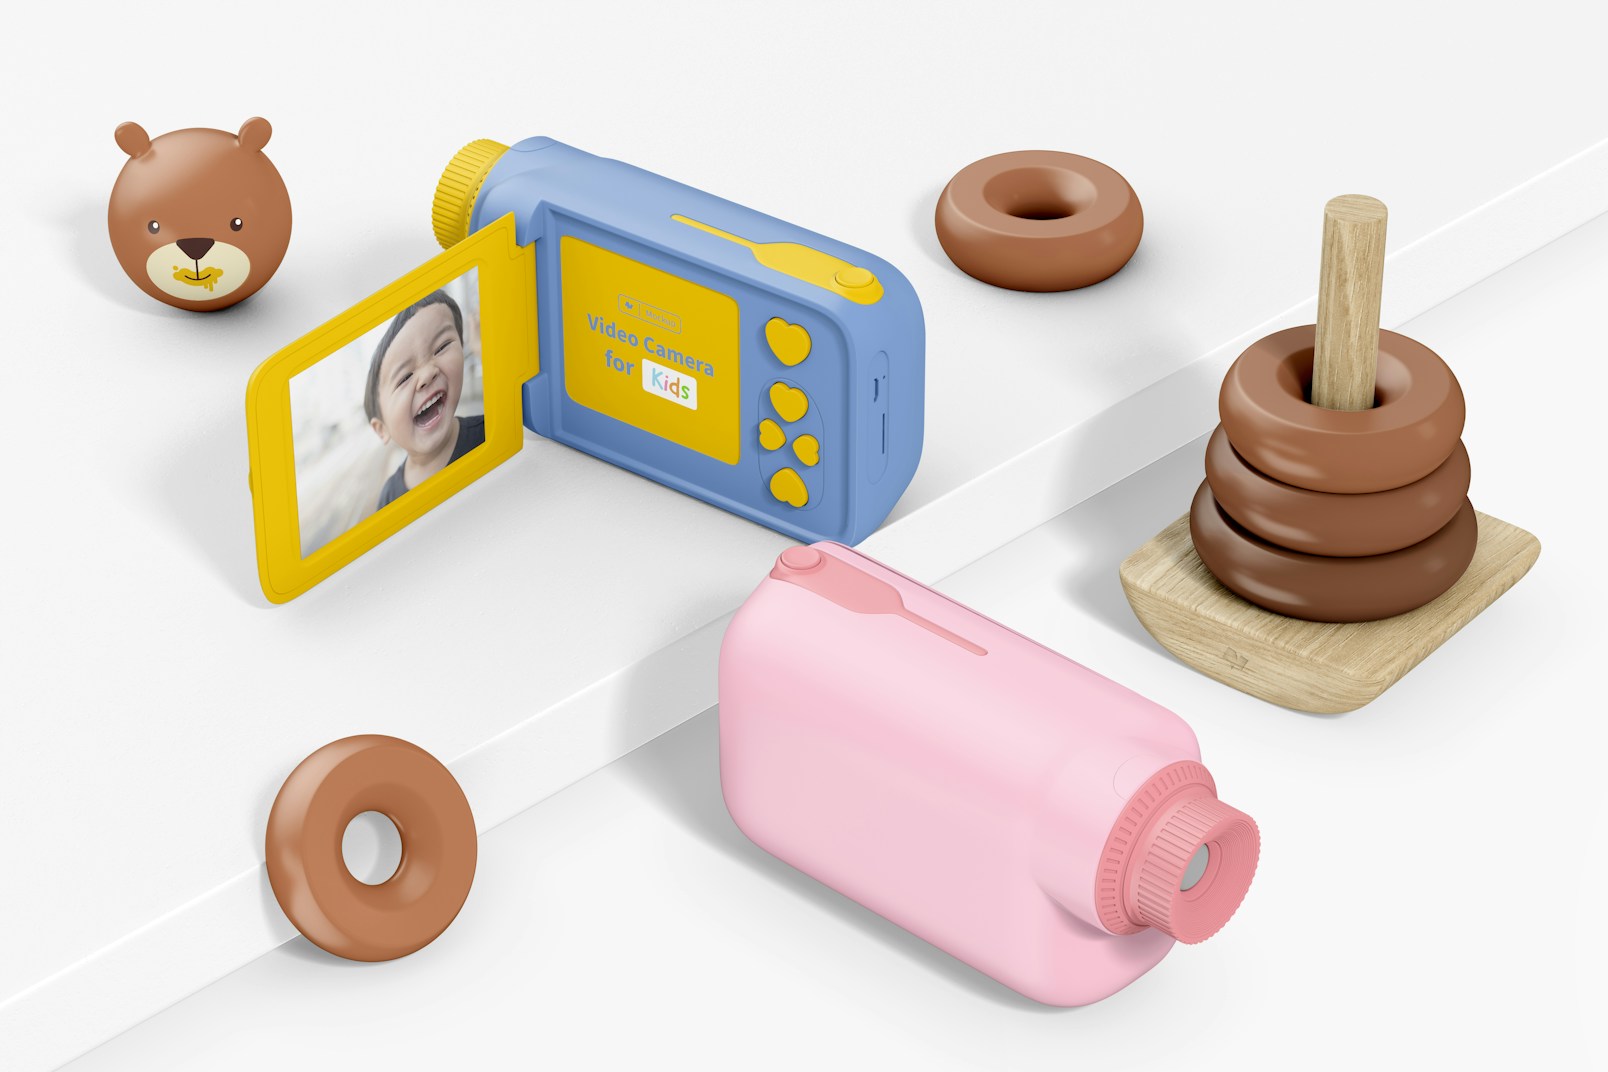 Video Cameras for Kids Mockup, Top View